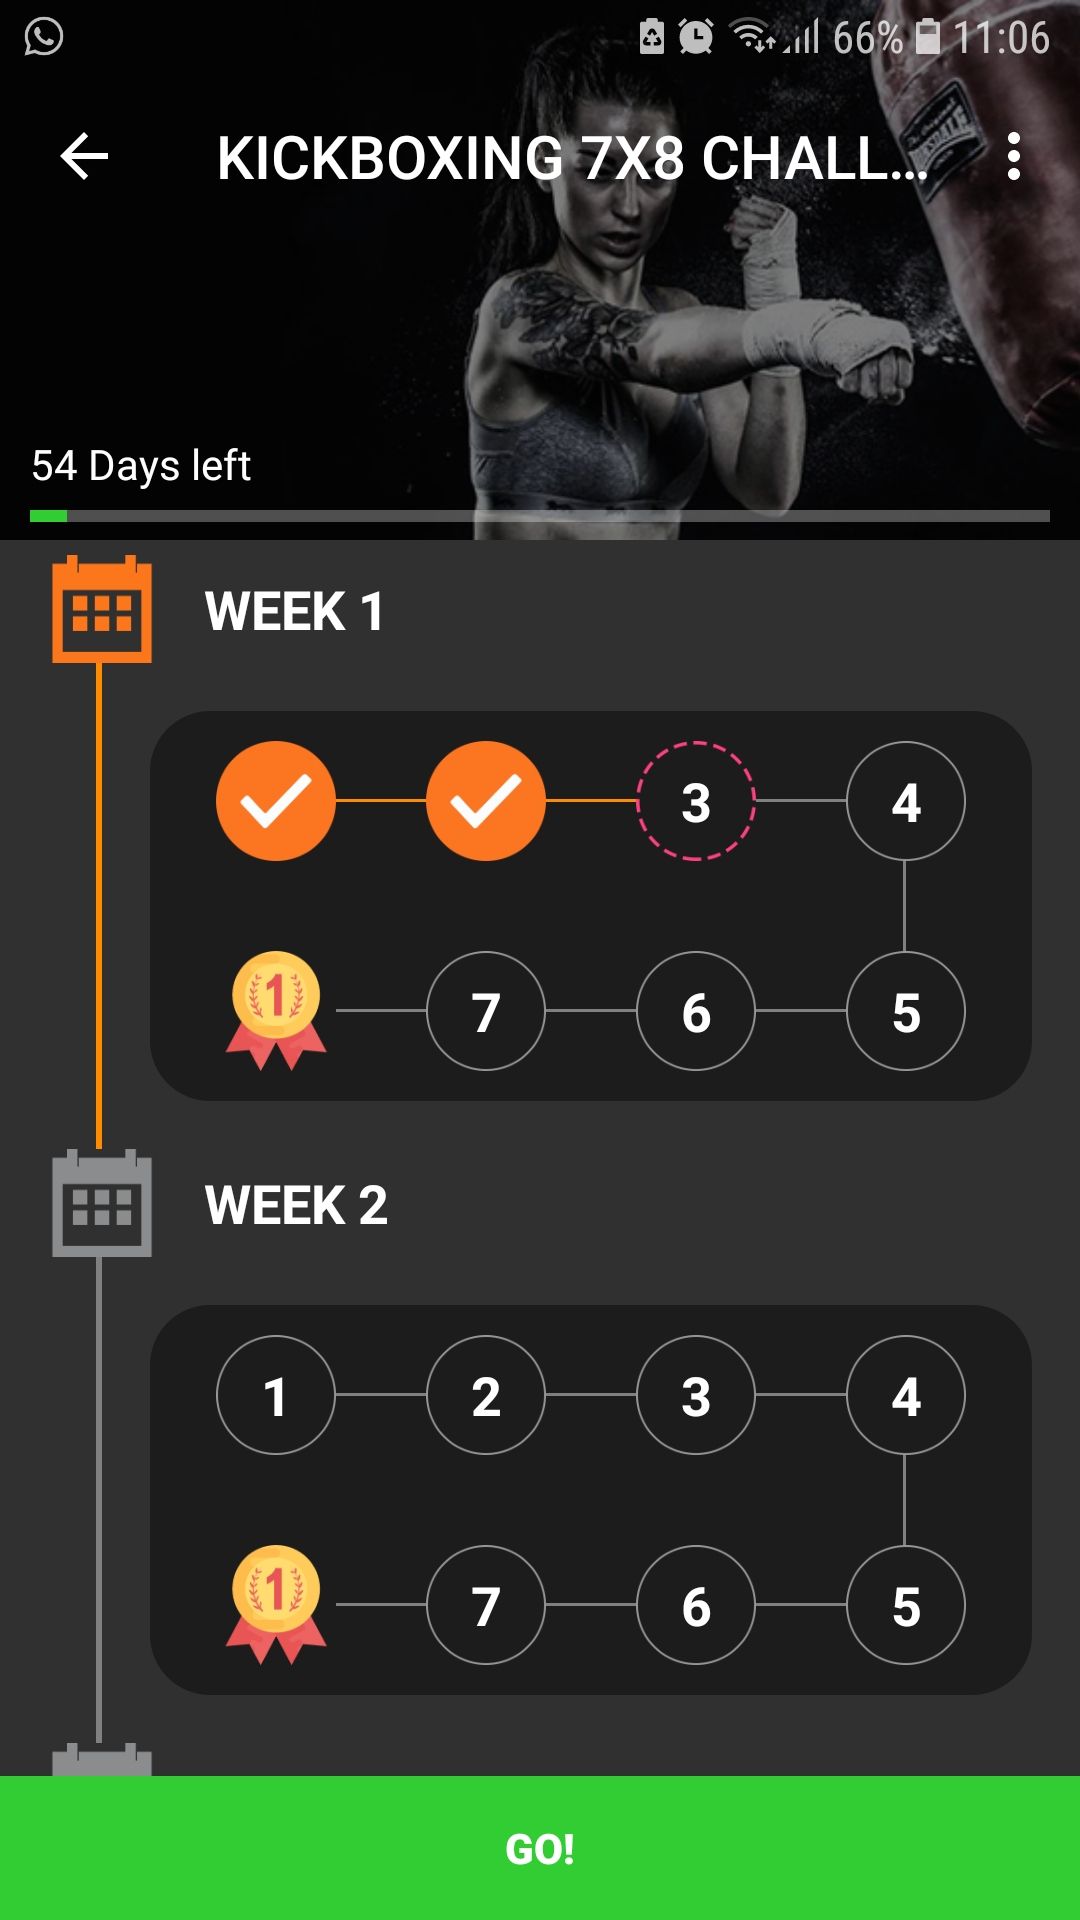 Kickboxing Fitness Workout mobile fitness app challenge